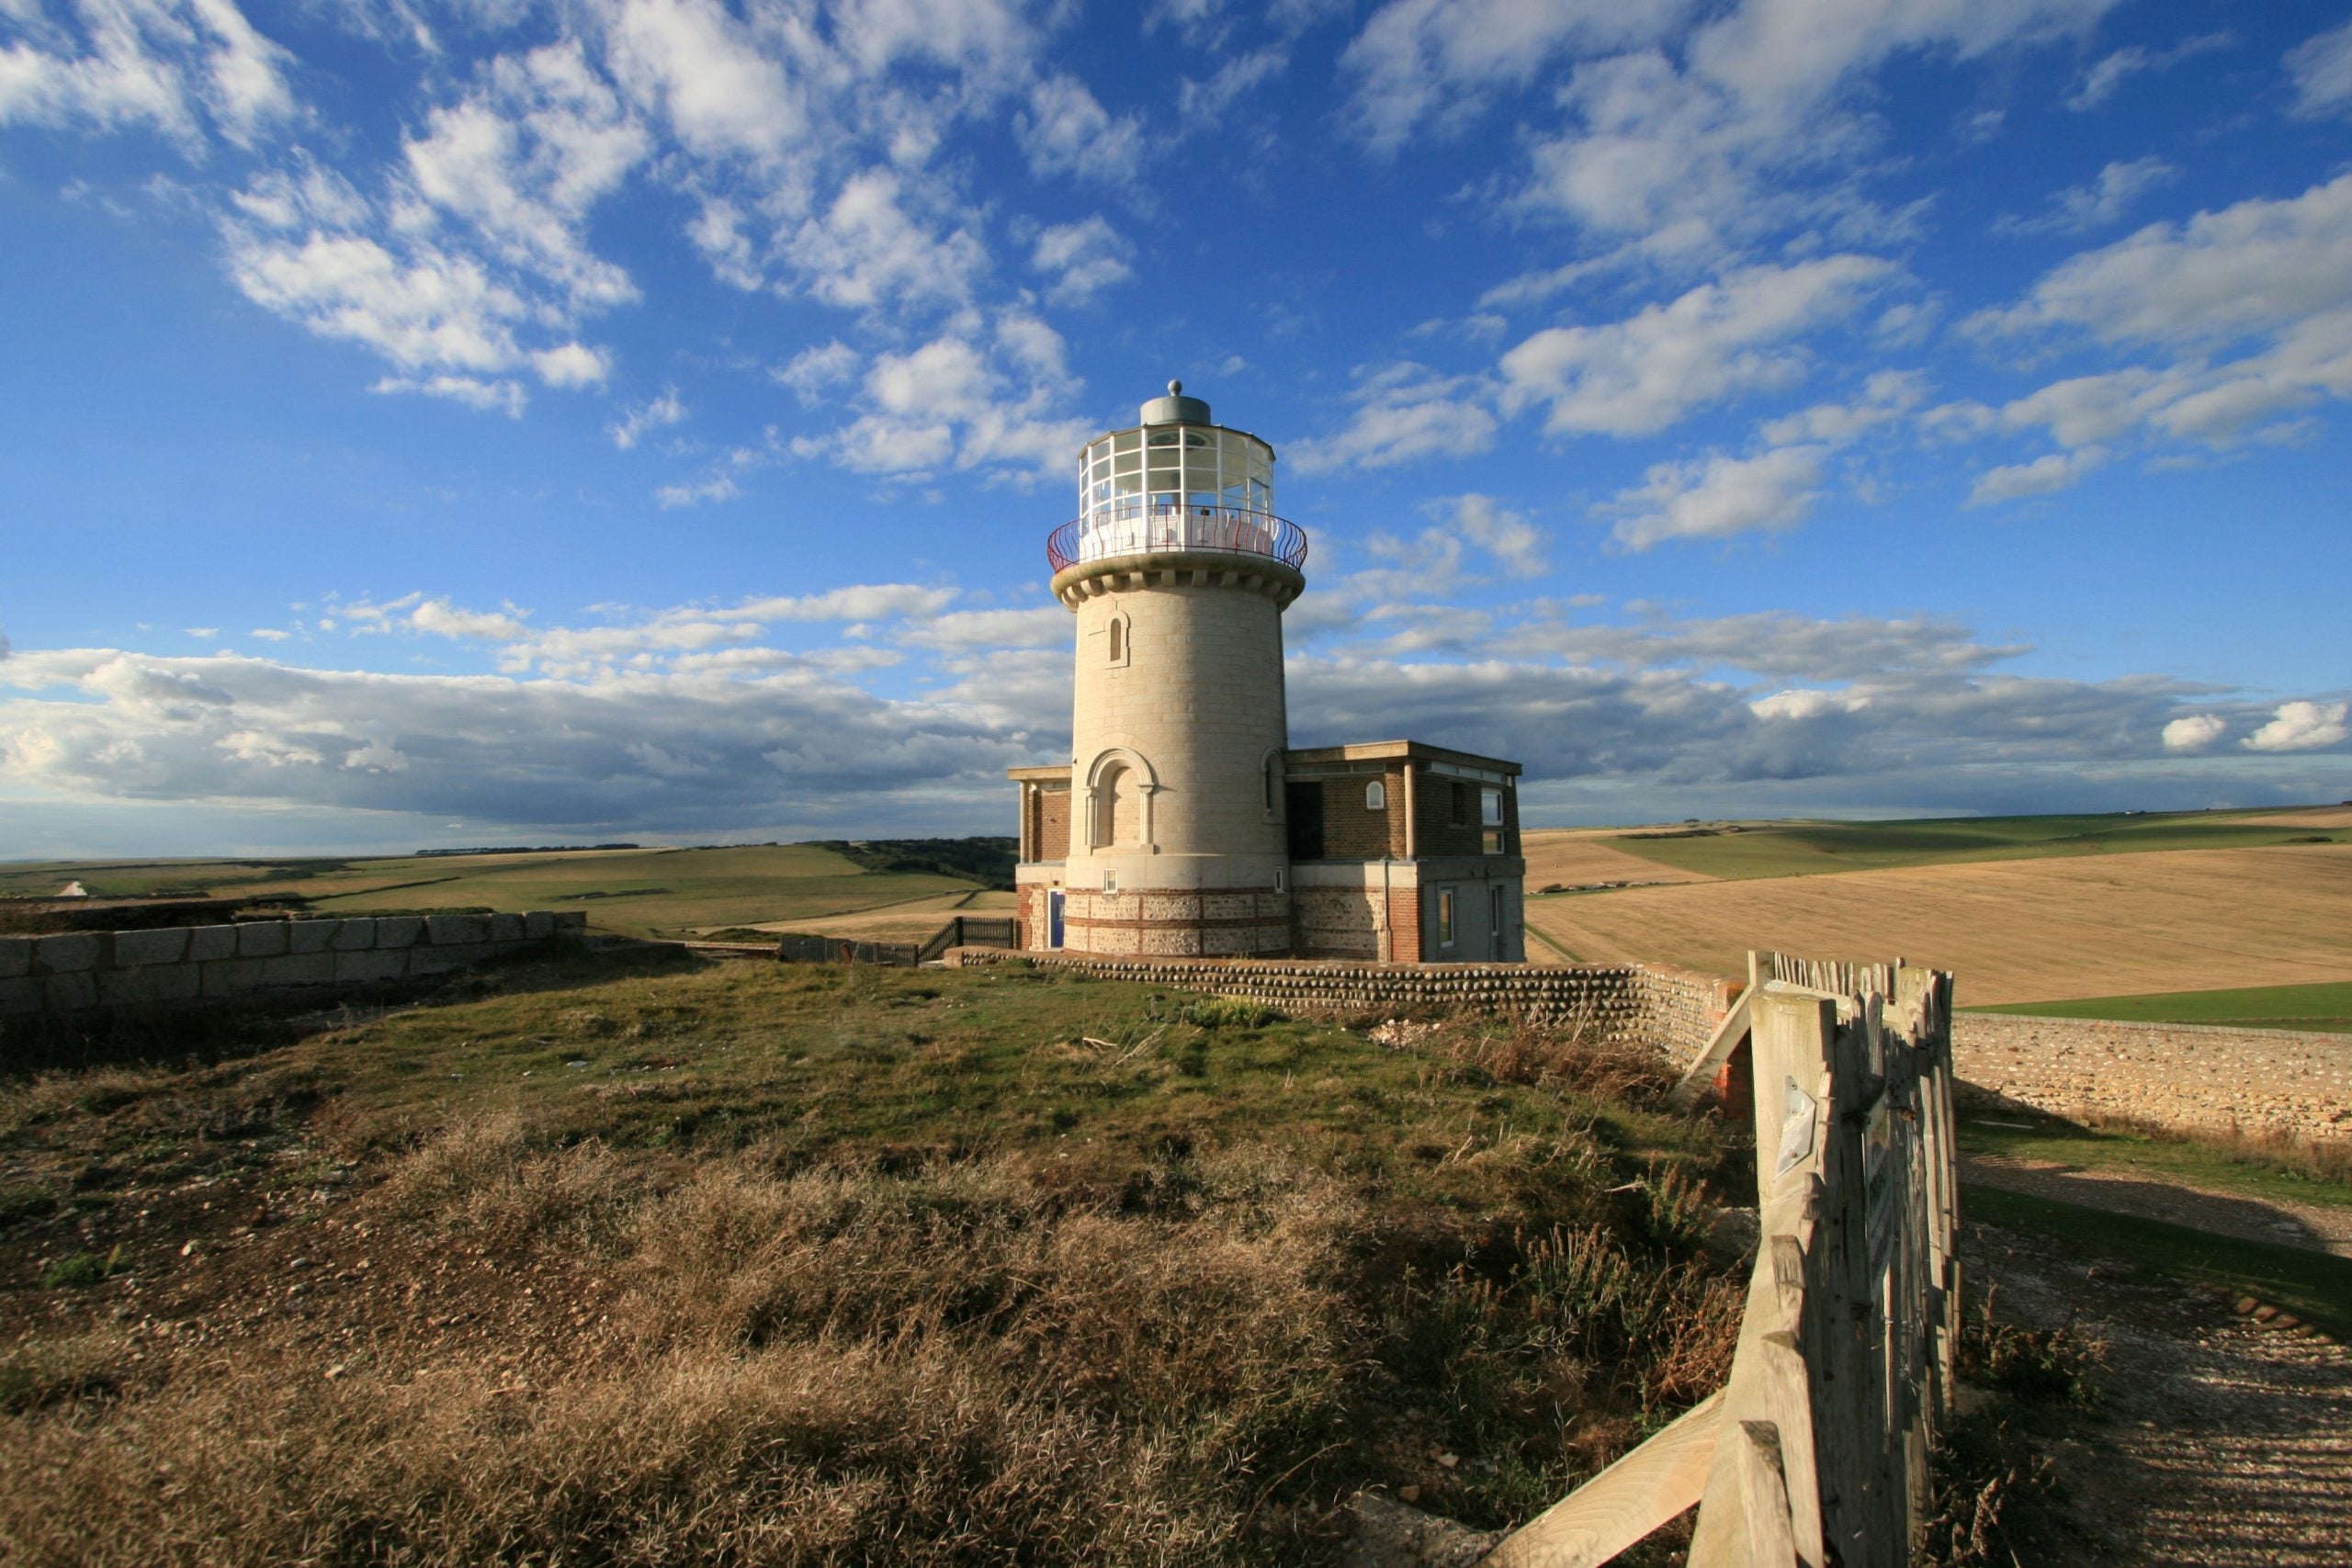 Decommissioned in 1902, Belle Tout lighthouse now has six rooms